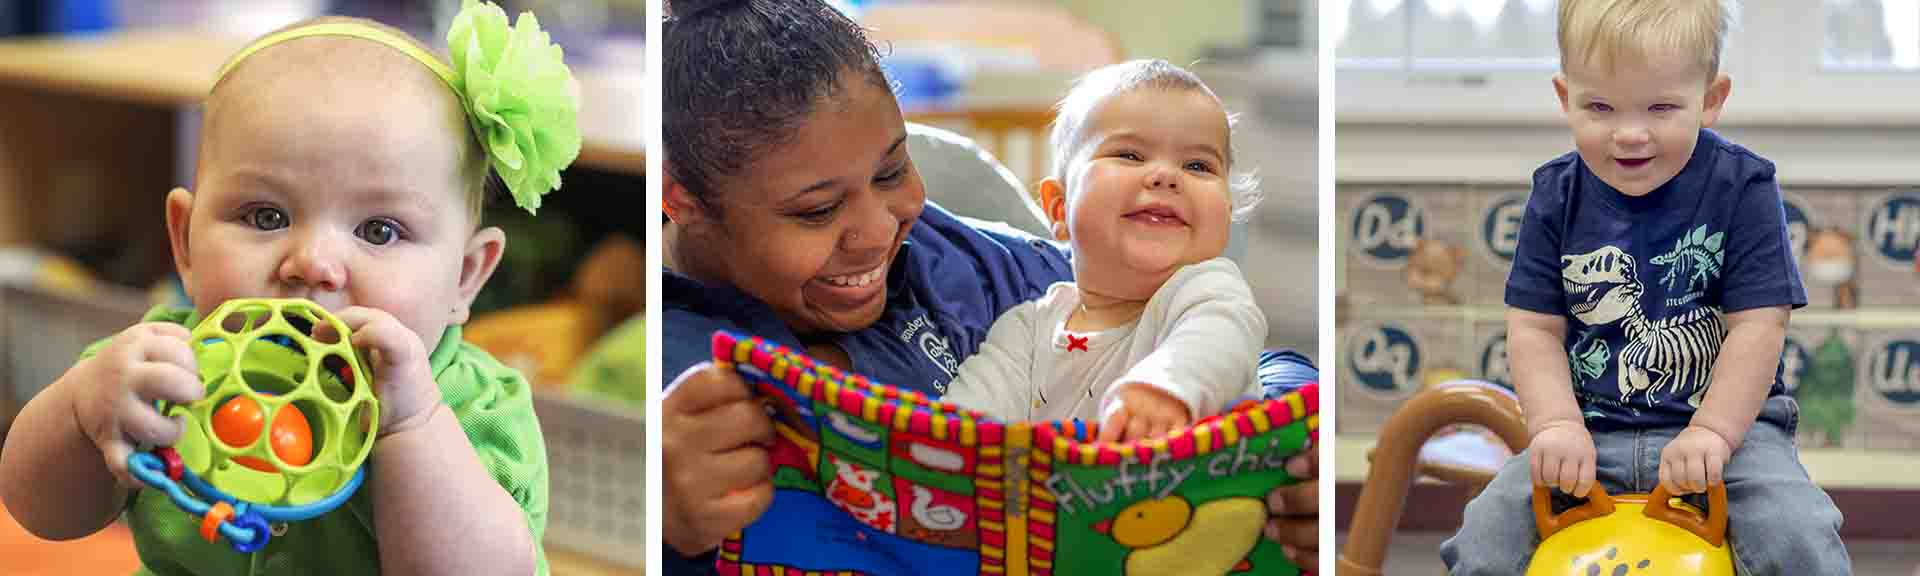 Playful Learning for Infants and Toddlers 